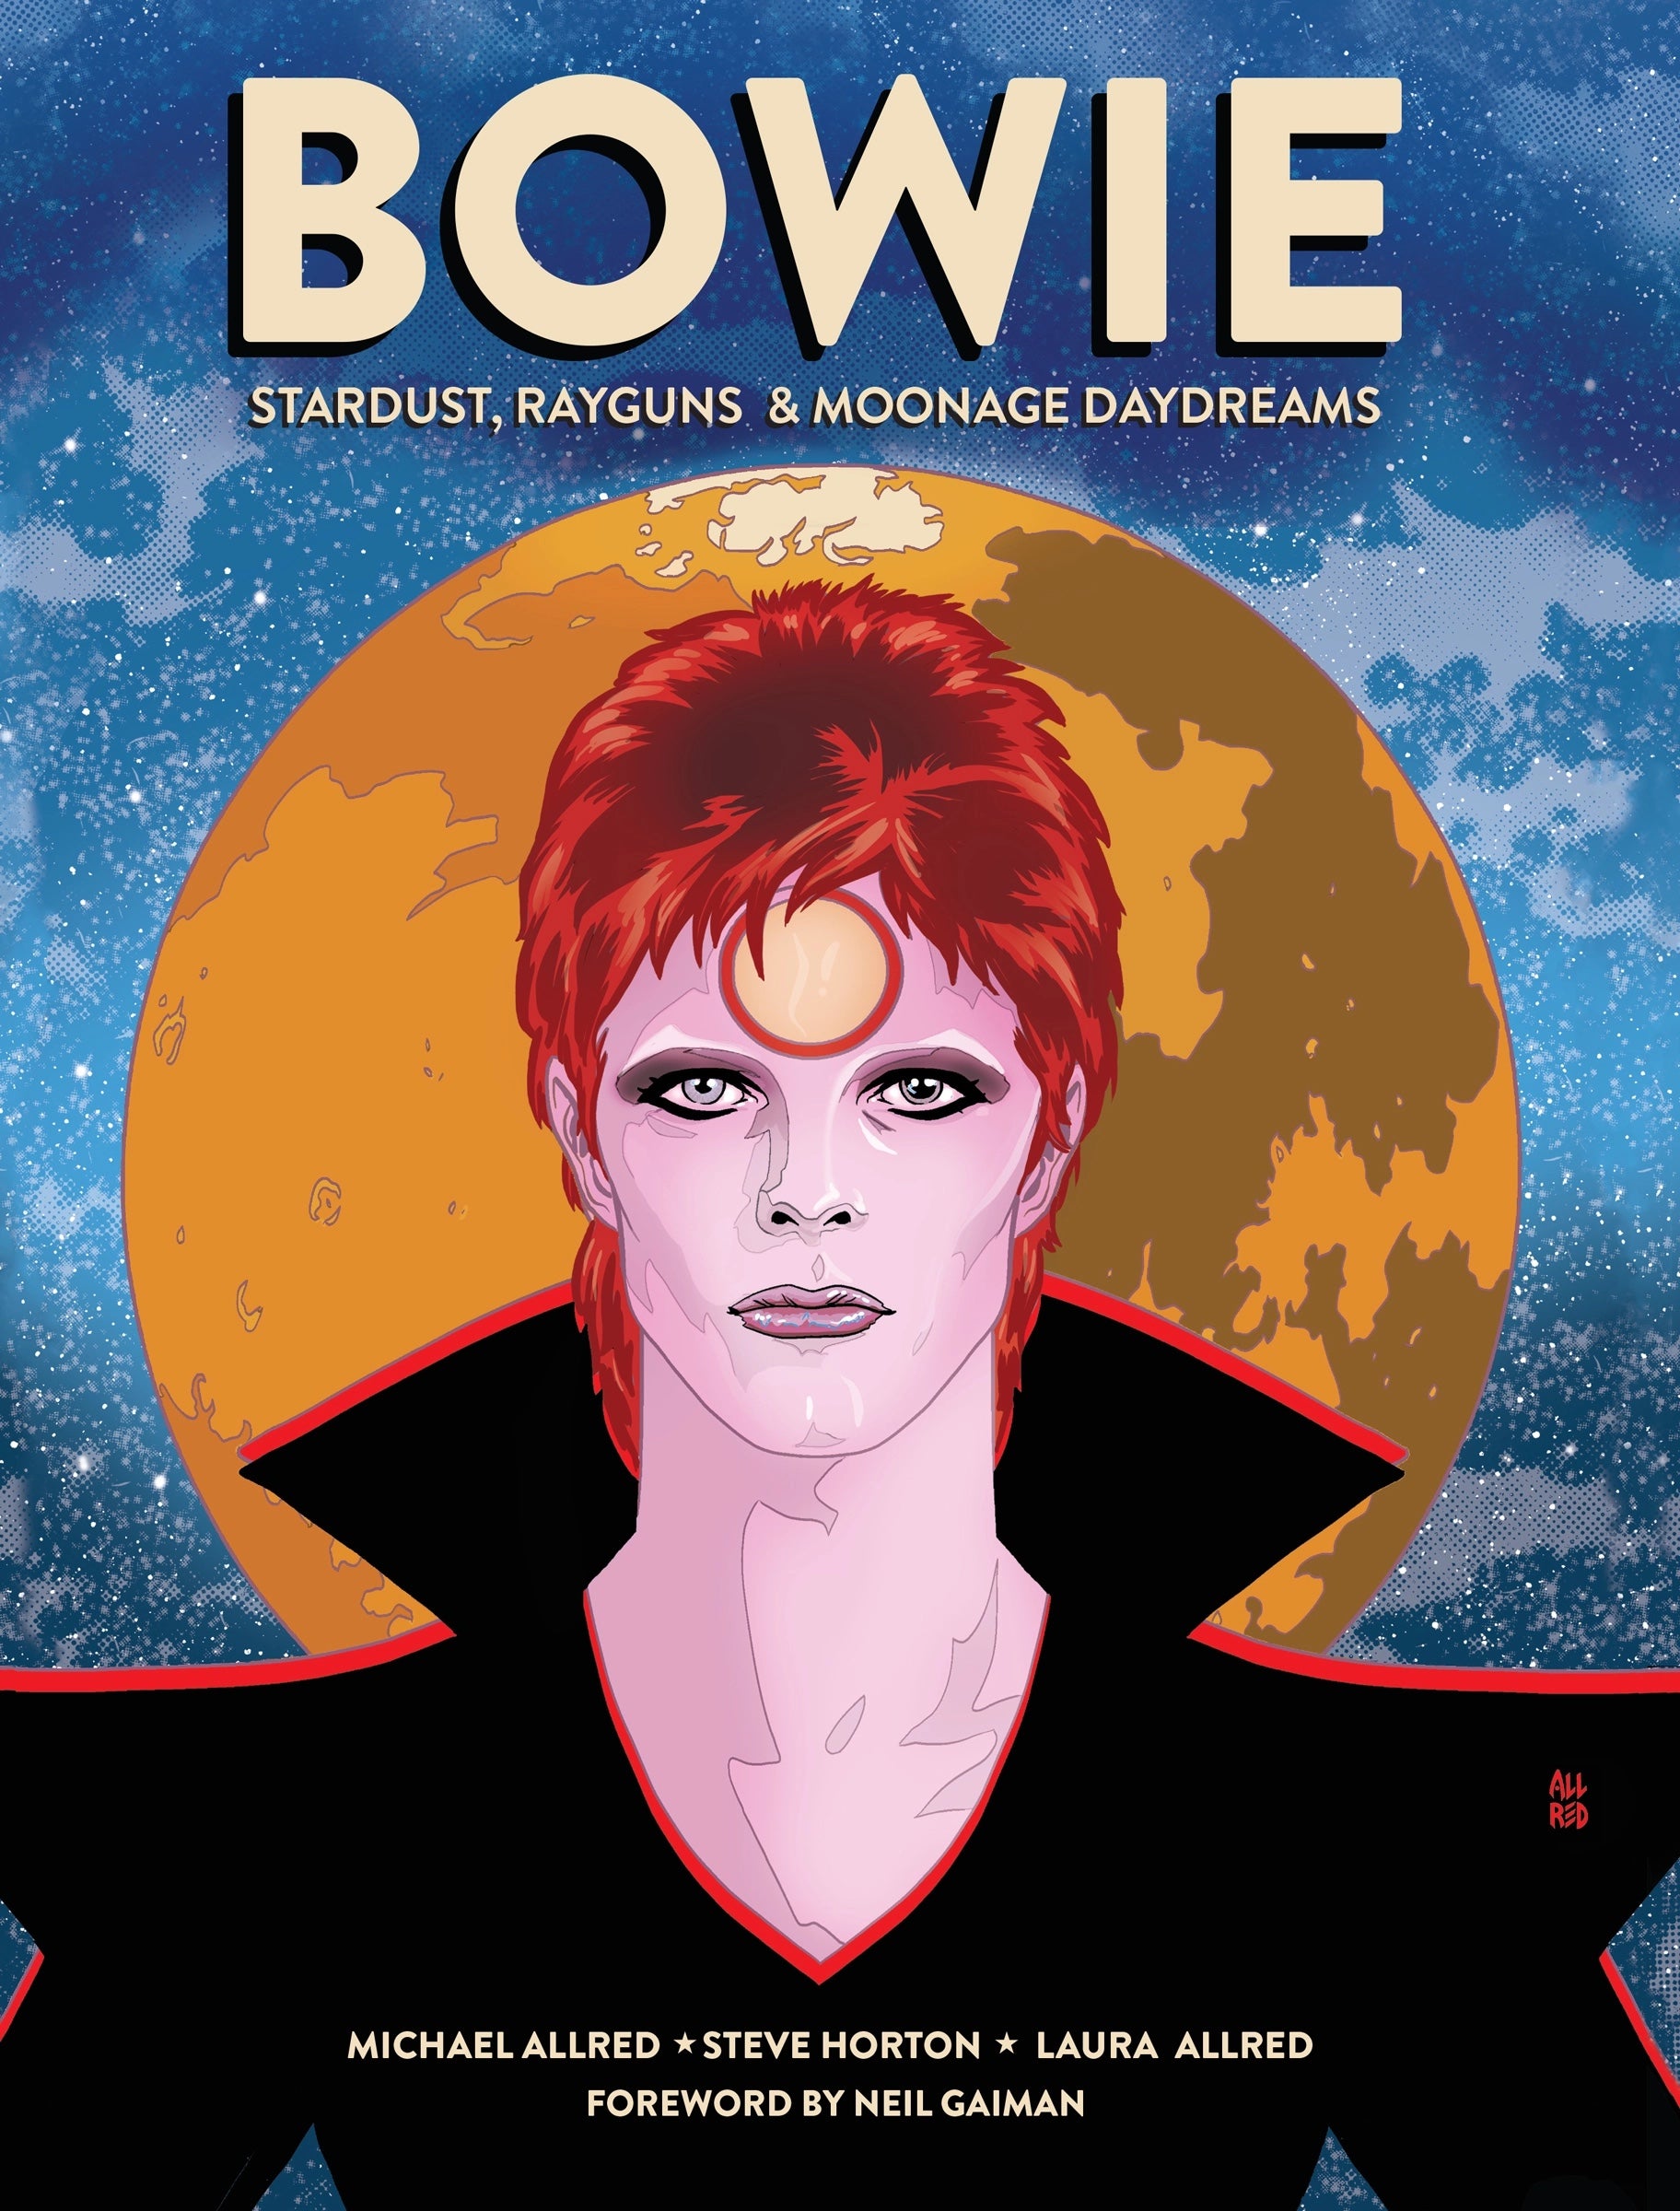 Bowie: Ray Guns and Moonage Daydreams cover by Mike Allred